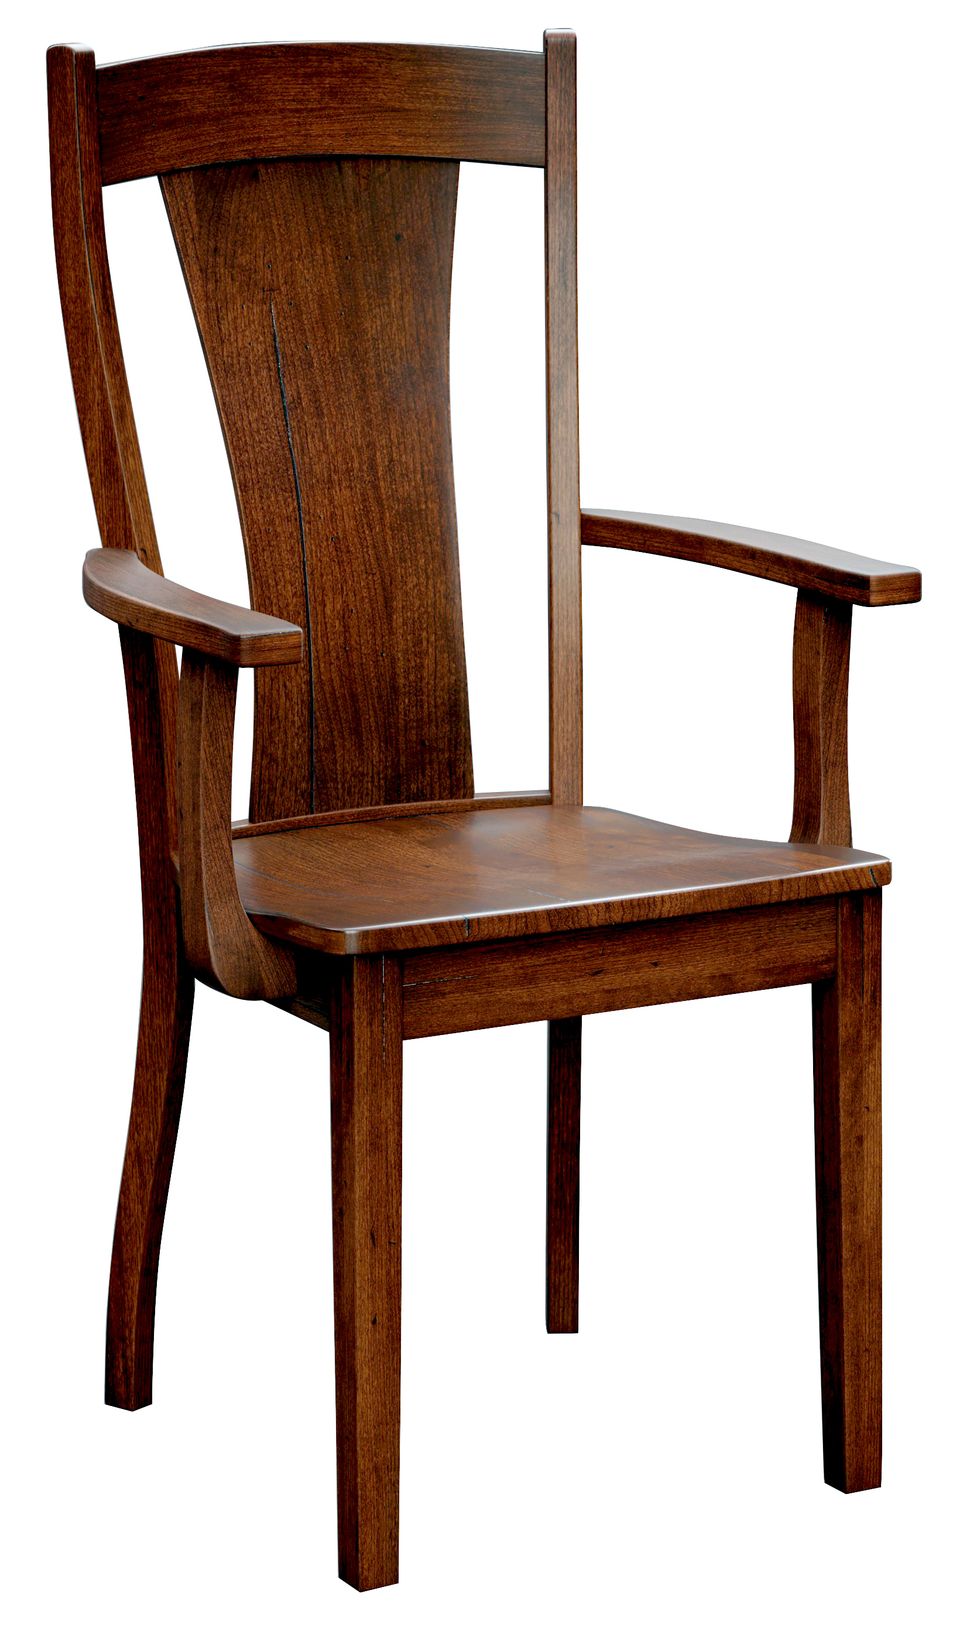 Bsw ashville arm chair cherry ocs heritage outline